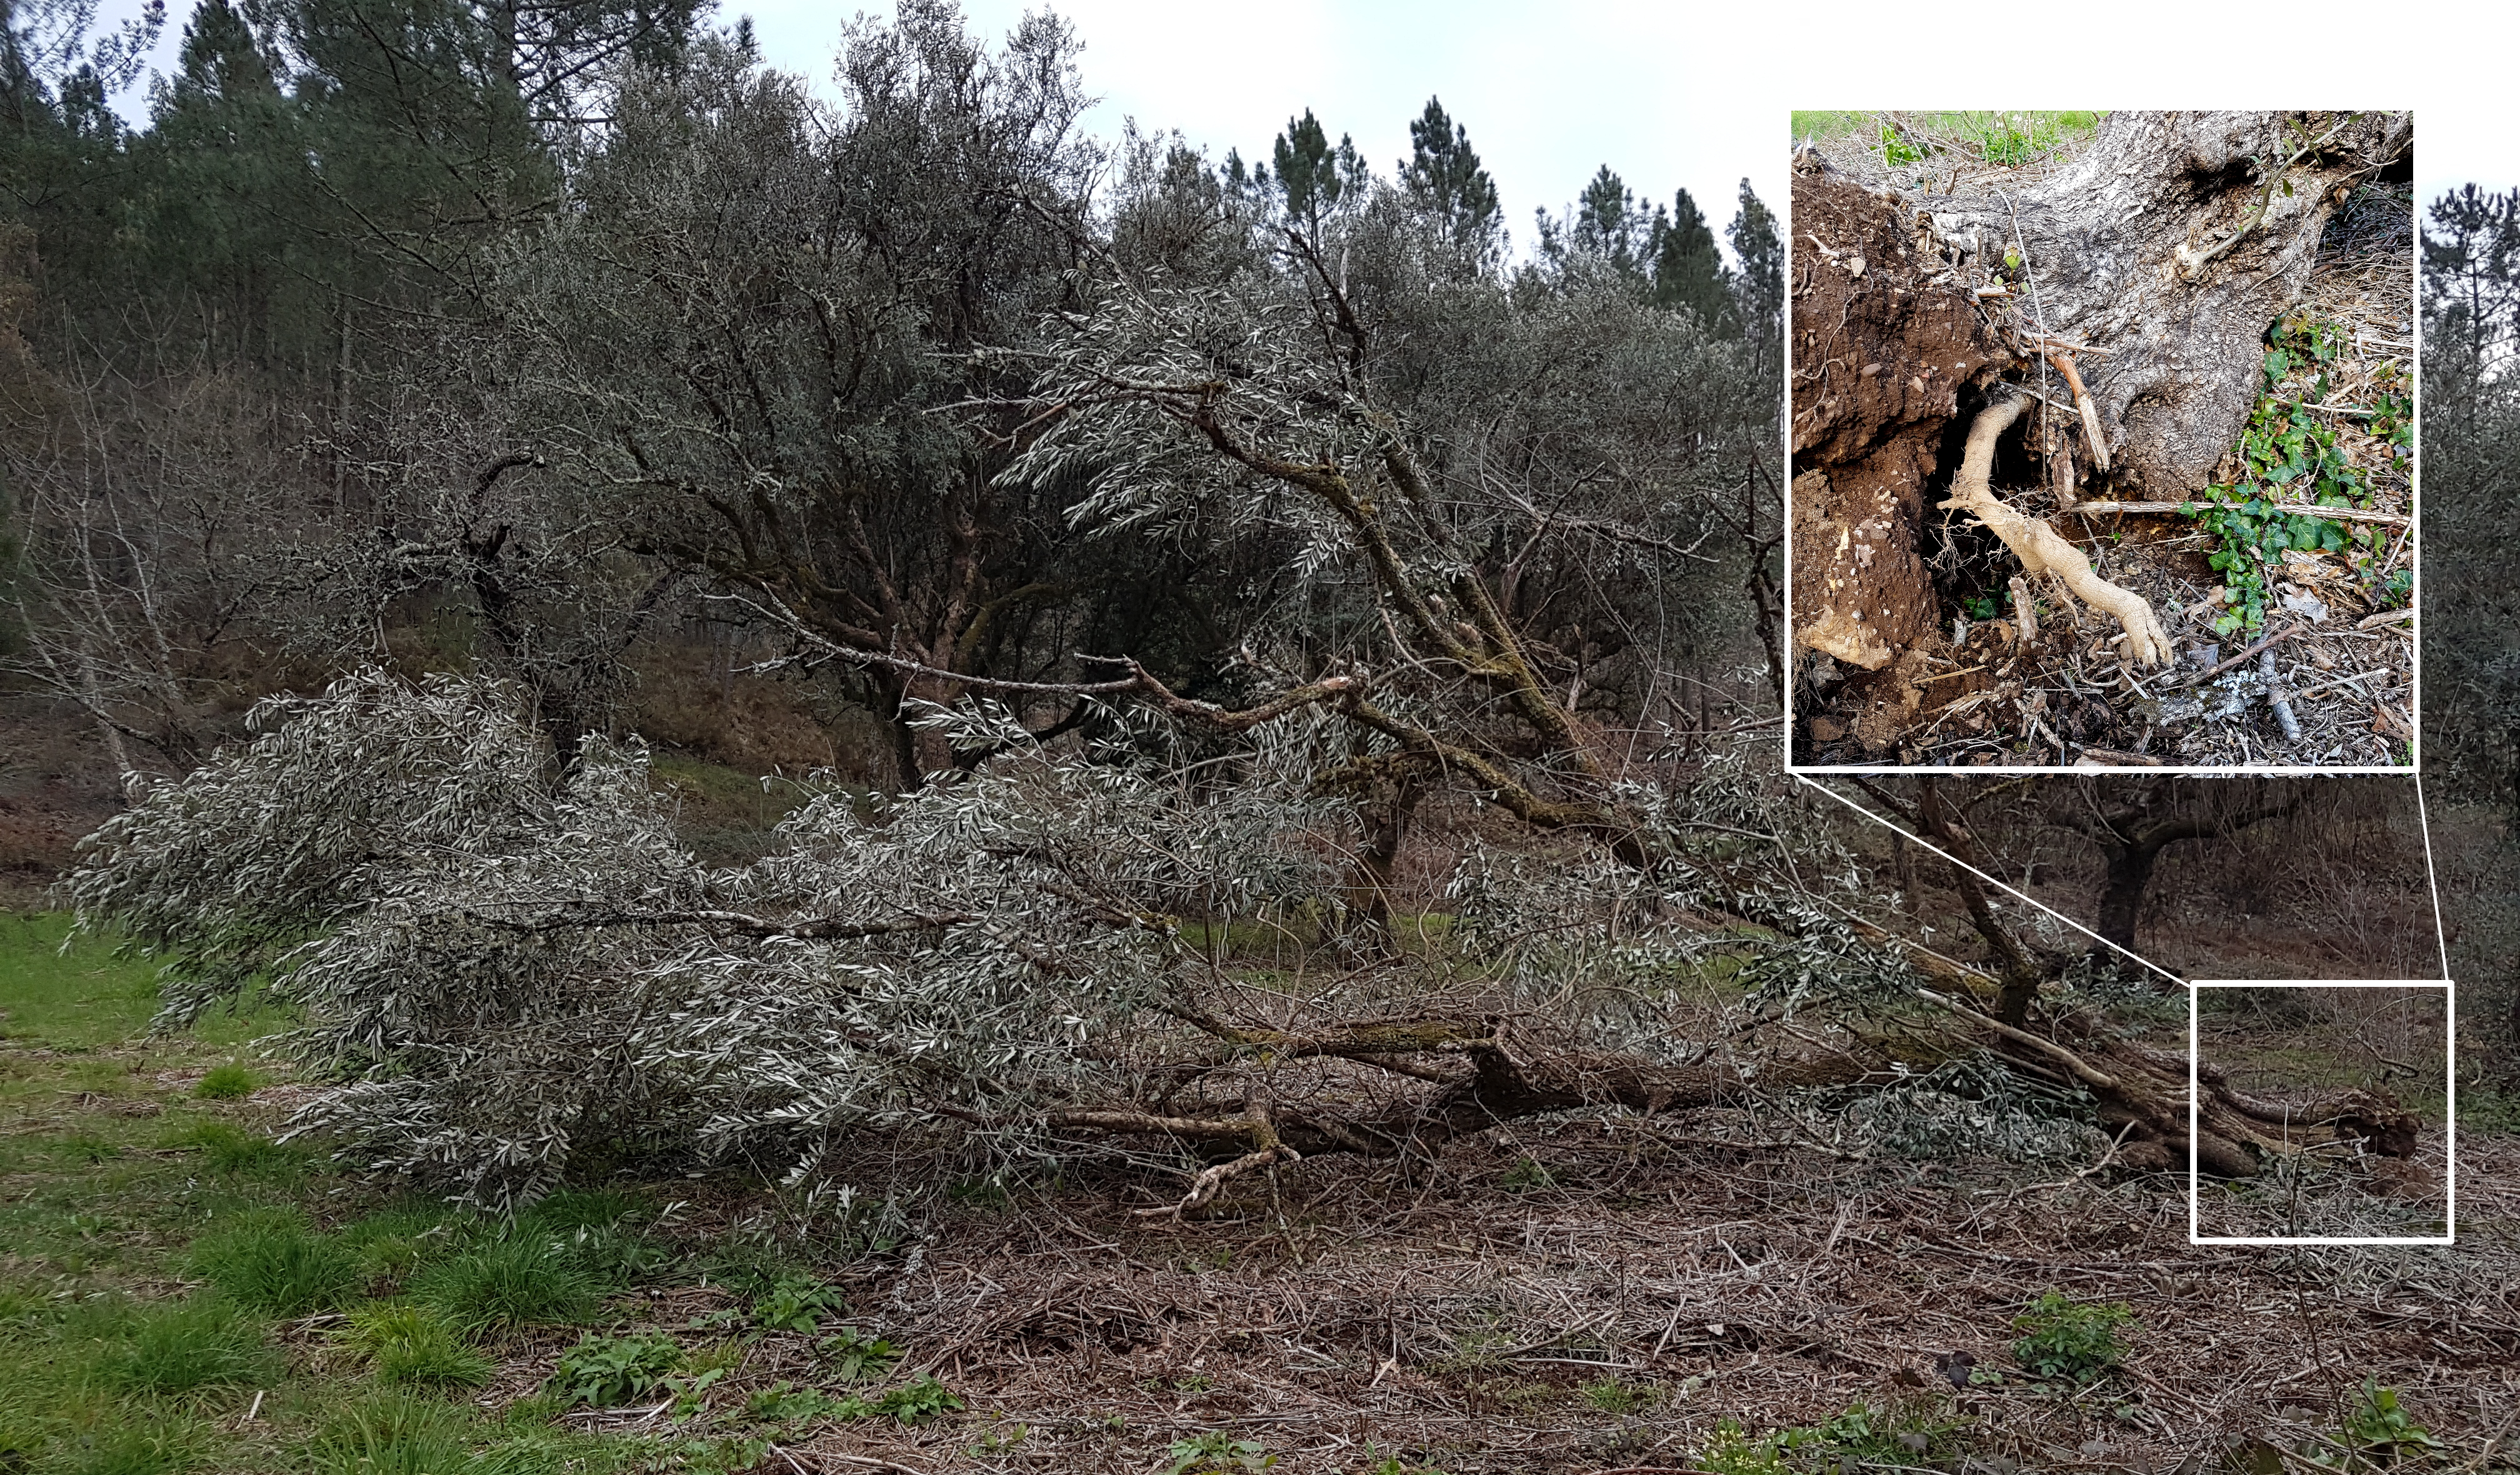 This olive tree toppled over during the winter. Only a very limited root system was revealed.